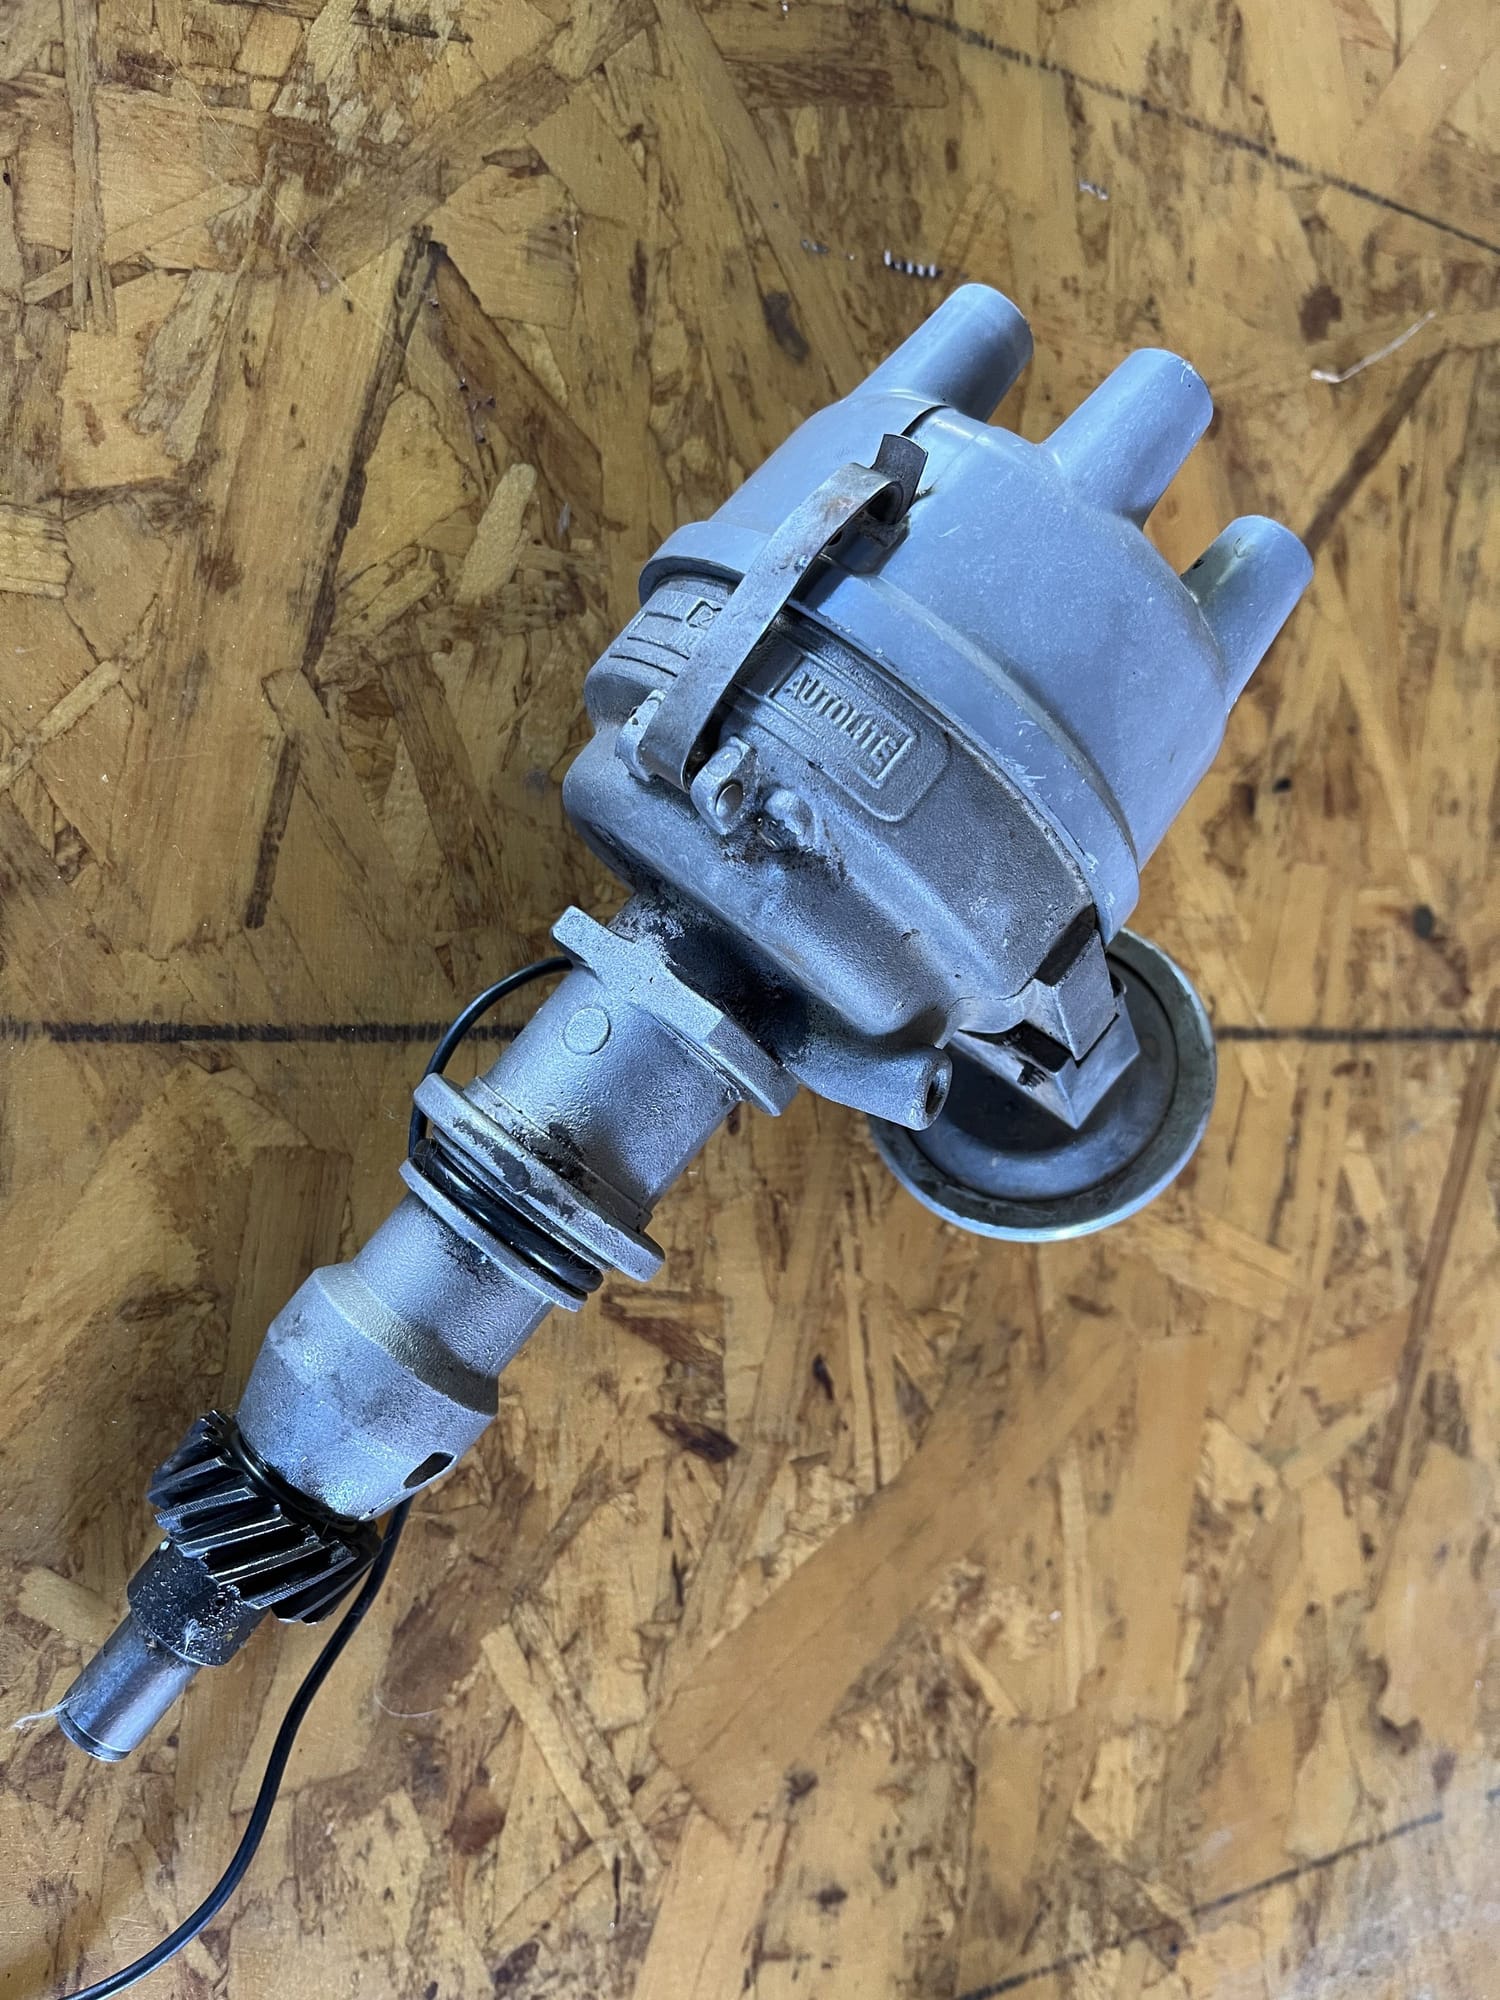 Engine - Electrical - FREE Autolite Distributor for 300 6 - Used - 0  All Models - Boulder, CO 80305, United States